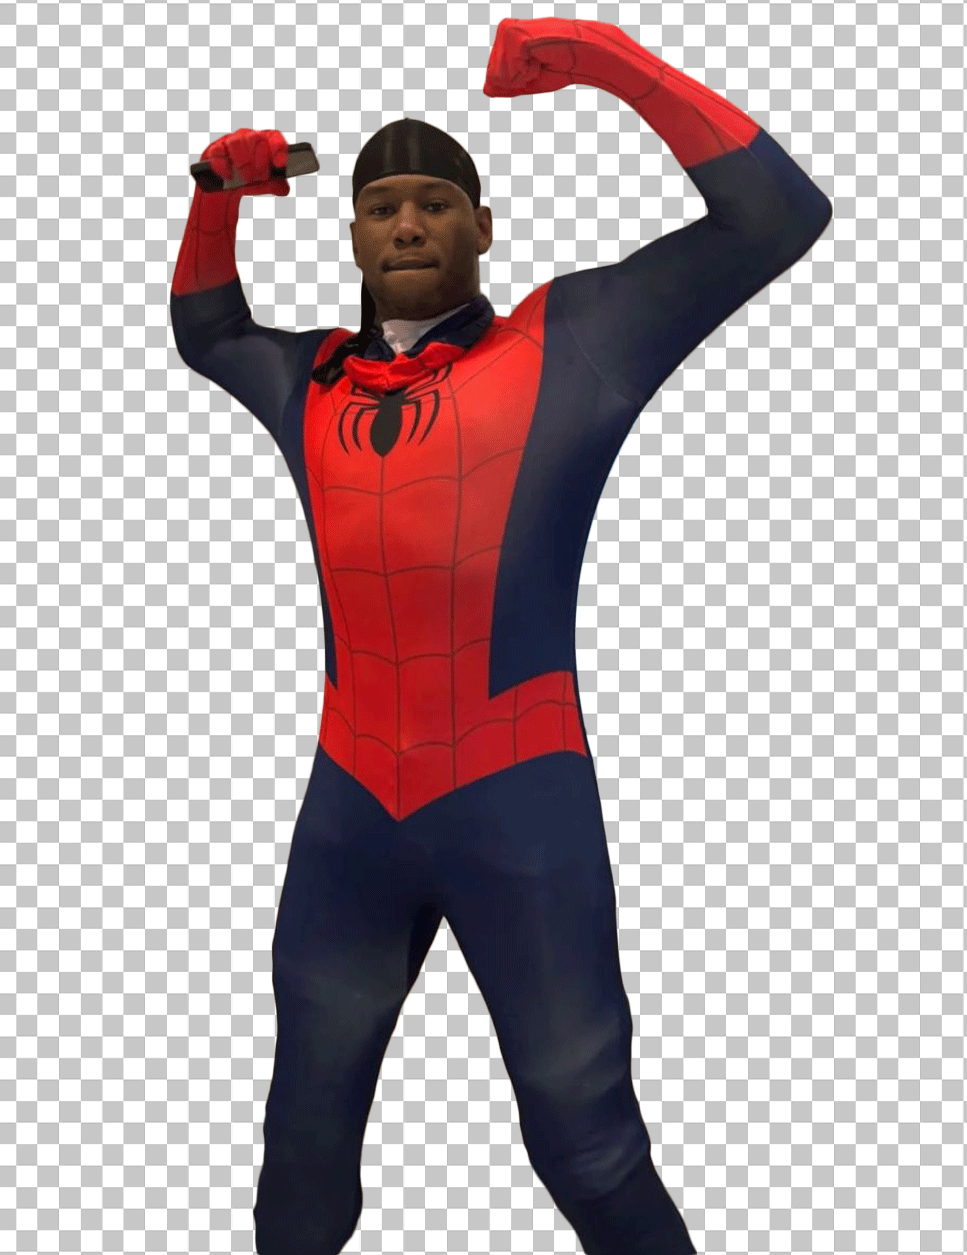 King Kenny in Spider Man suit PNG Image